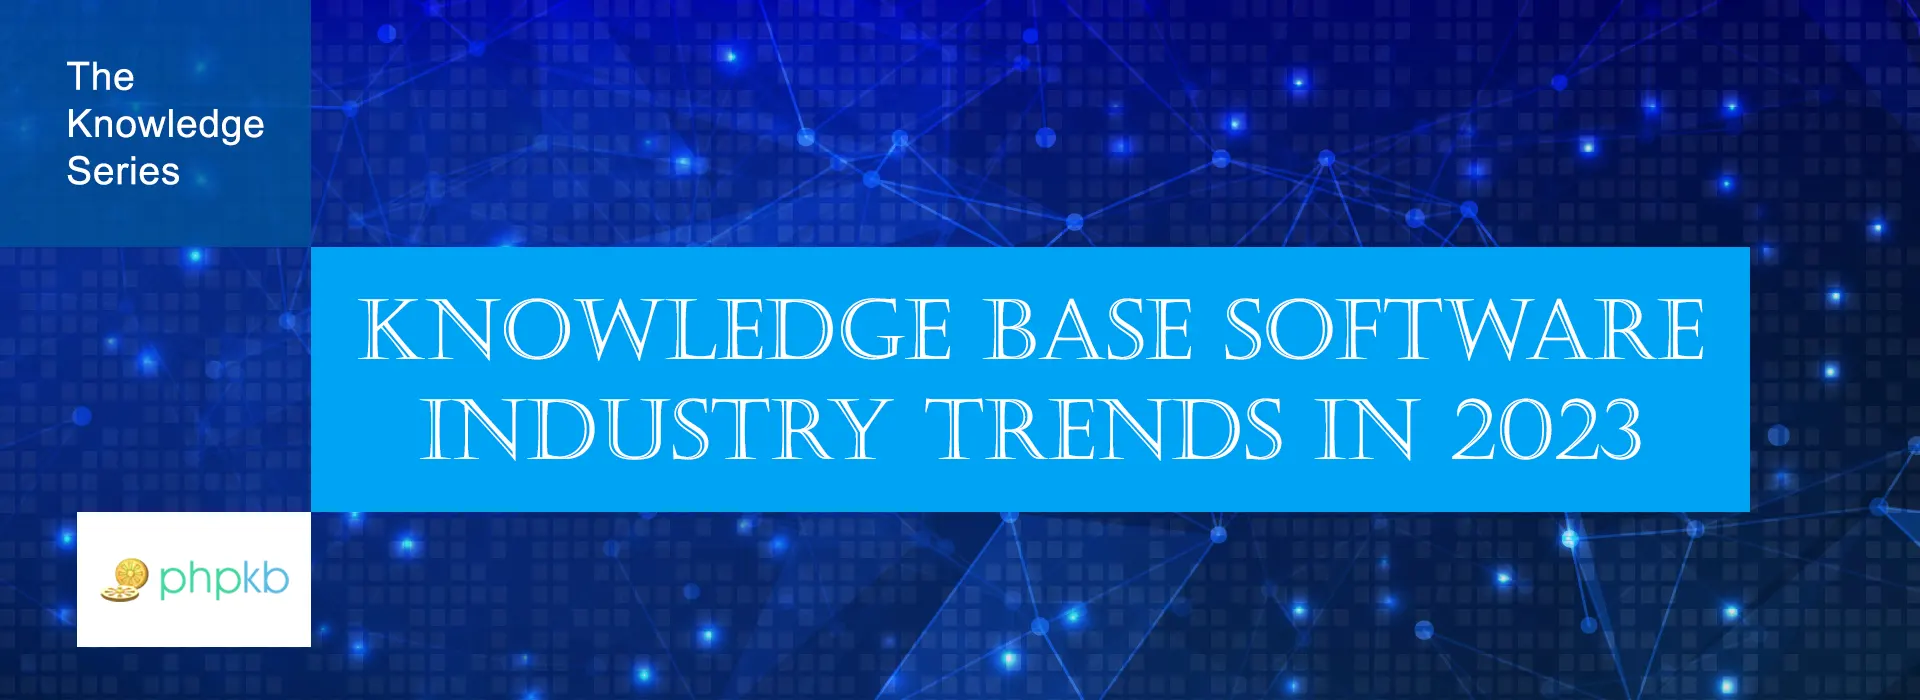 Knowledge Base Software Industry Trends